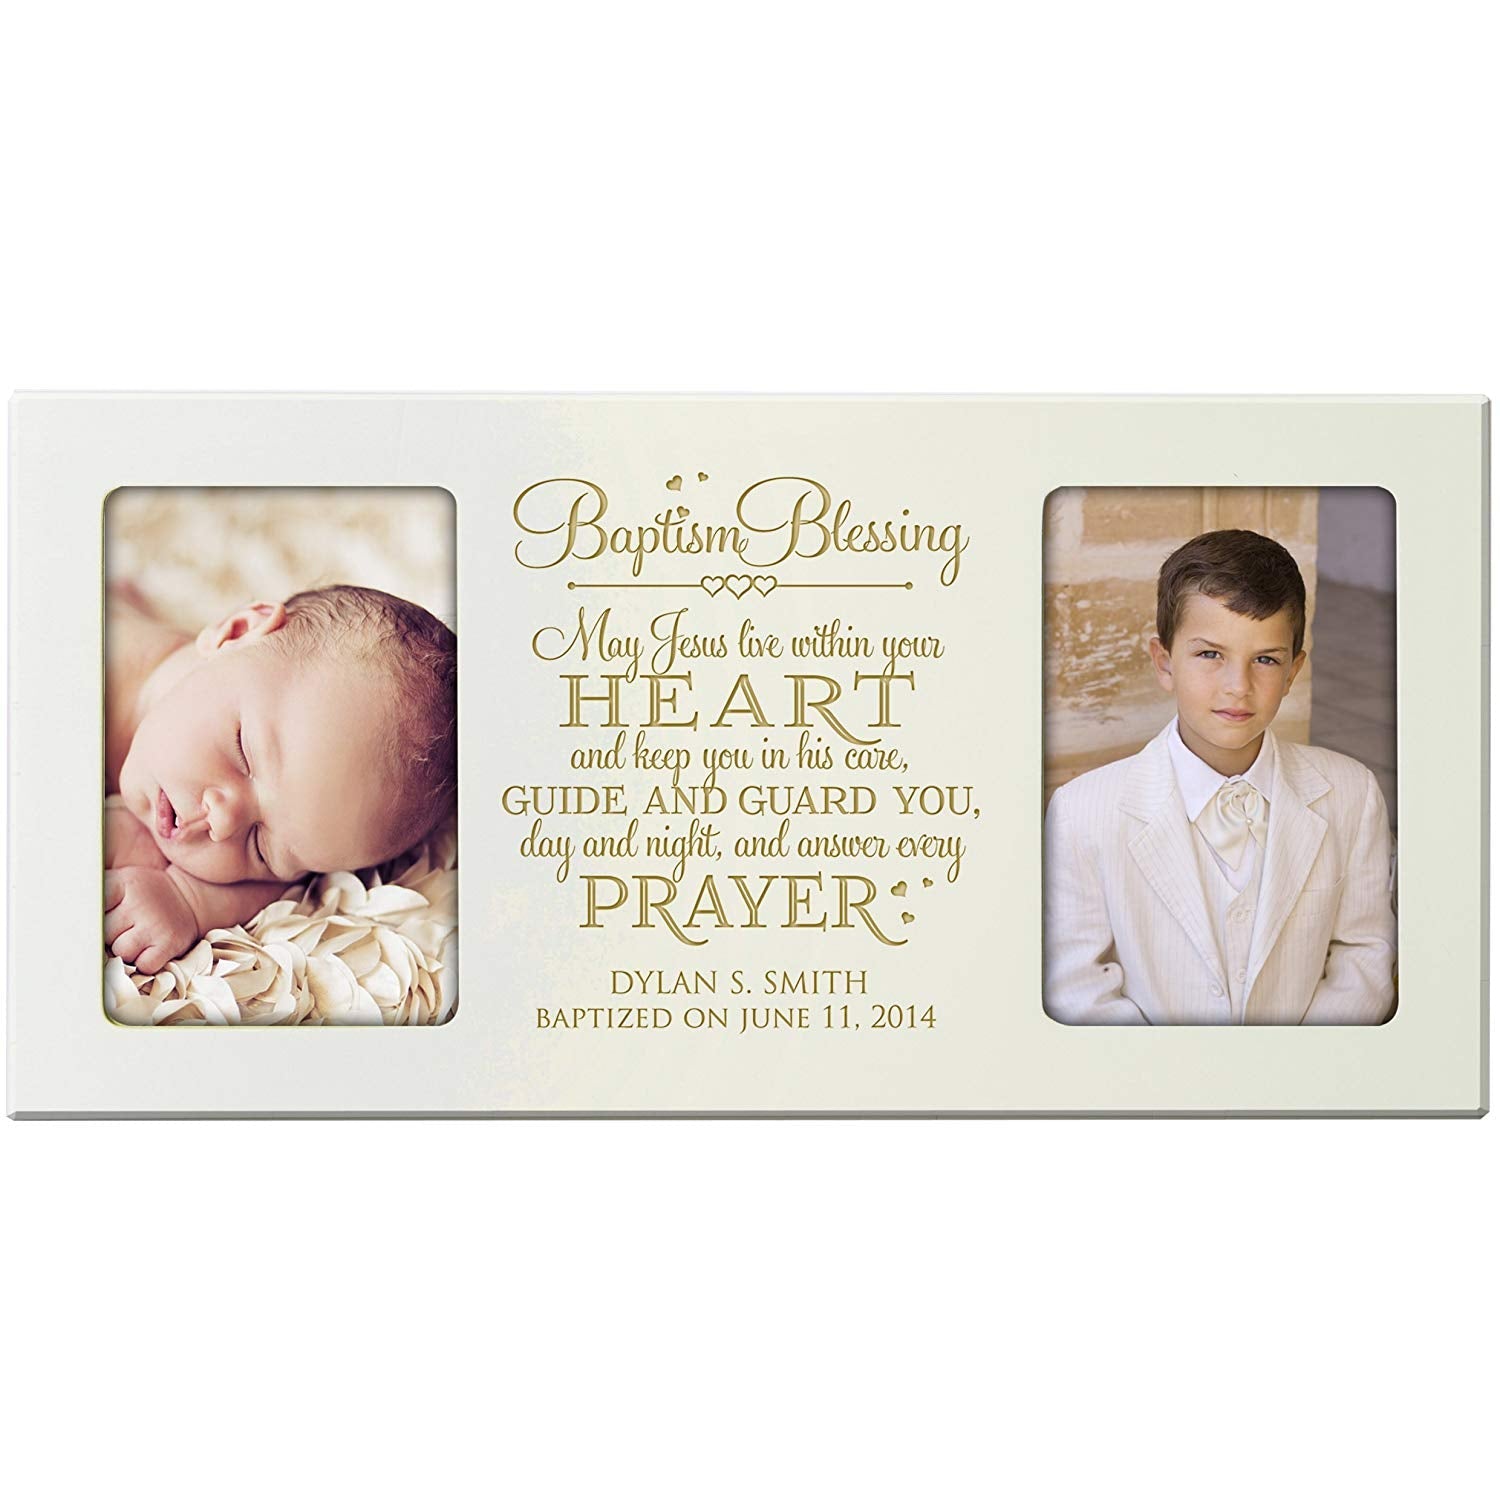 Personalized First Communion Photo Frame Gift "Baptism Blessing" - LifeSong Milestones